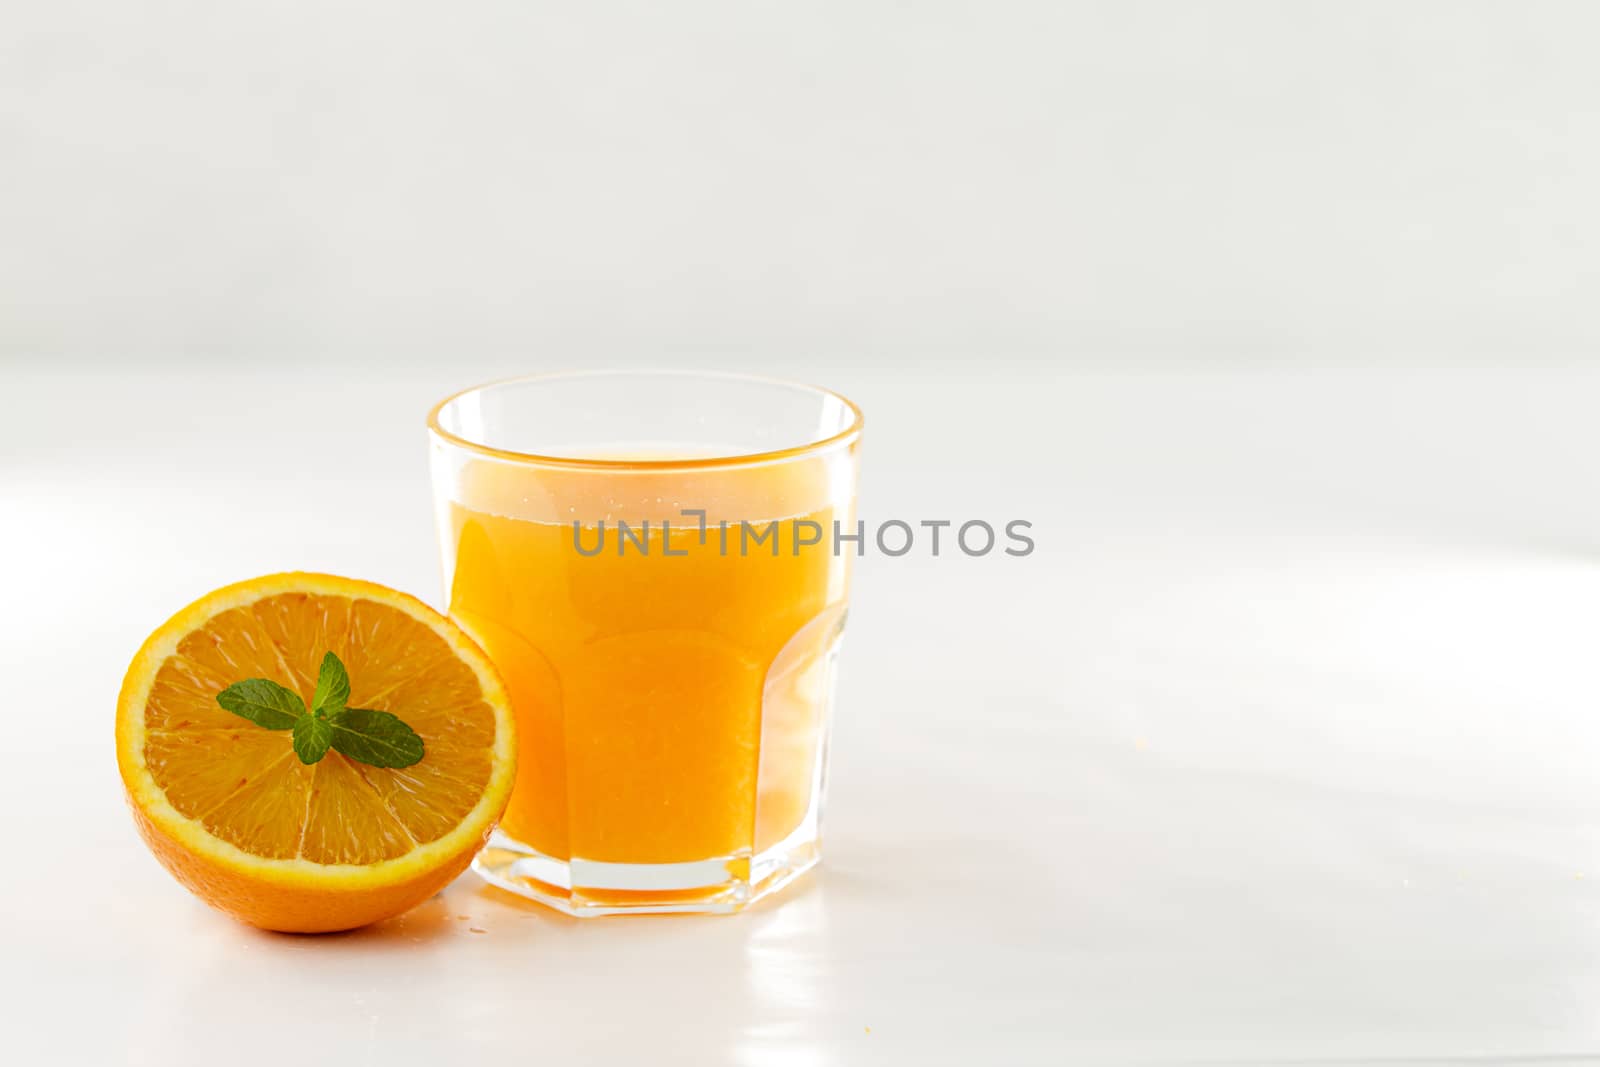 An inviting glass full of orange juice and a half one with a fresh mint leaf in its center on a white background